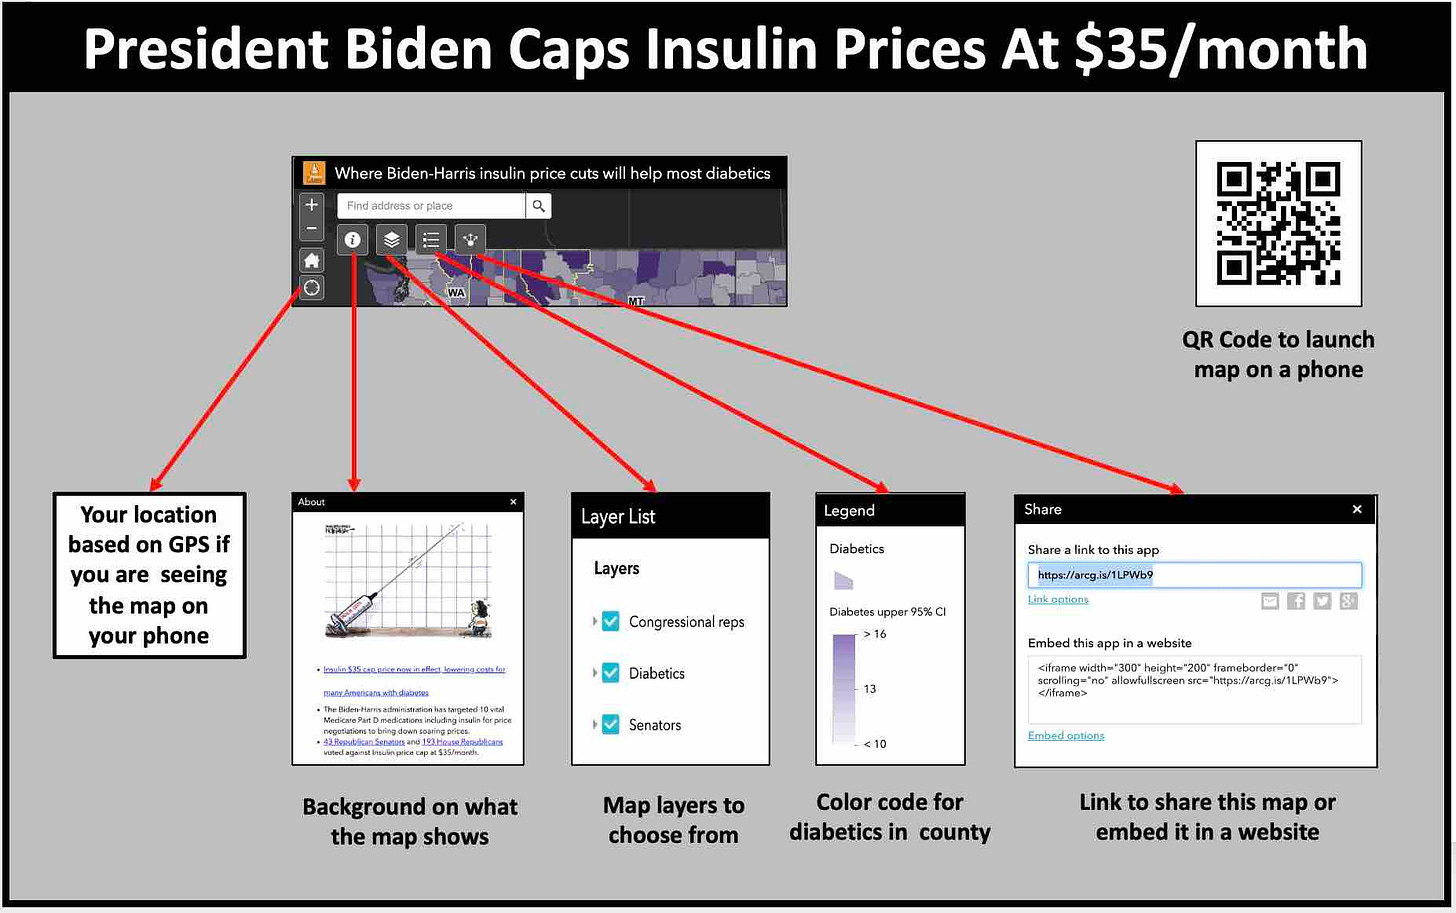 How to use this map of President Biden's $35/month insulin price cap